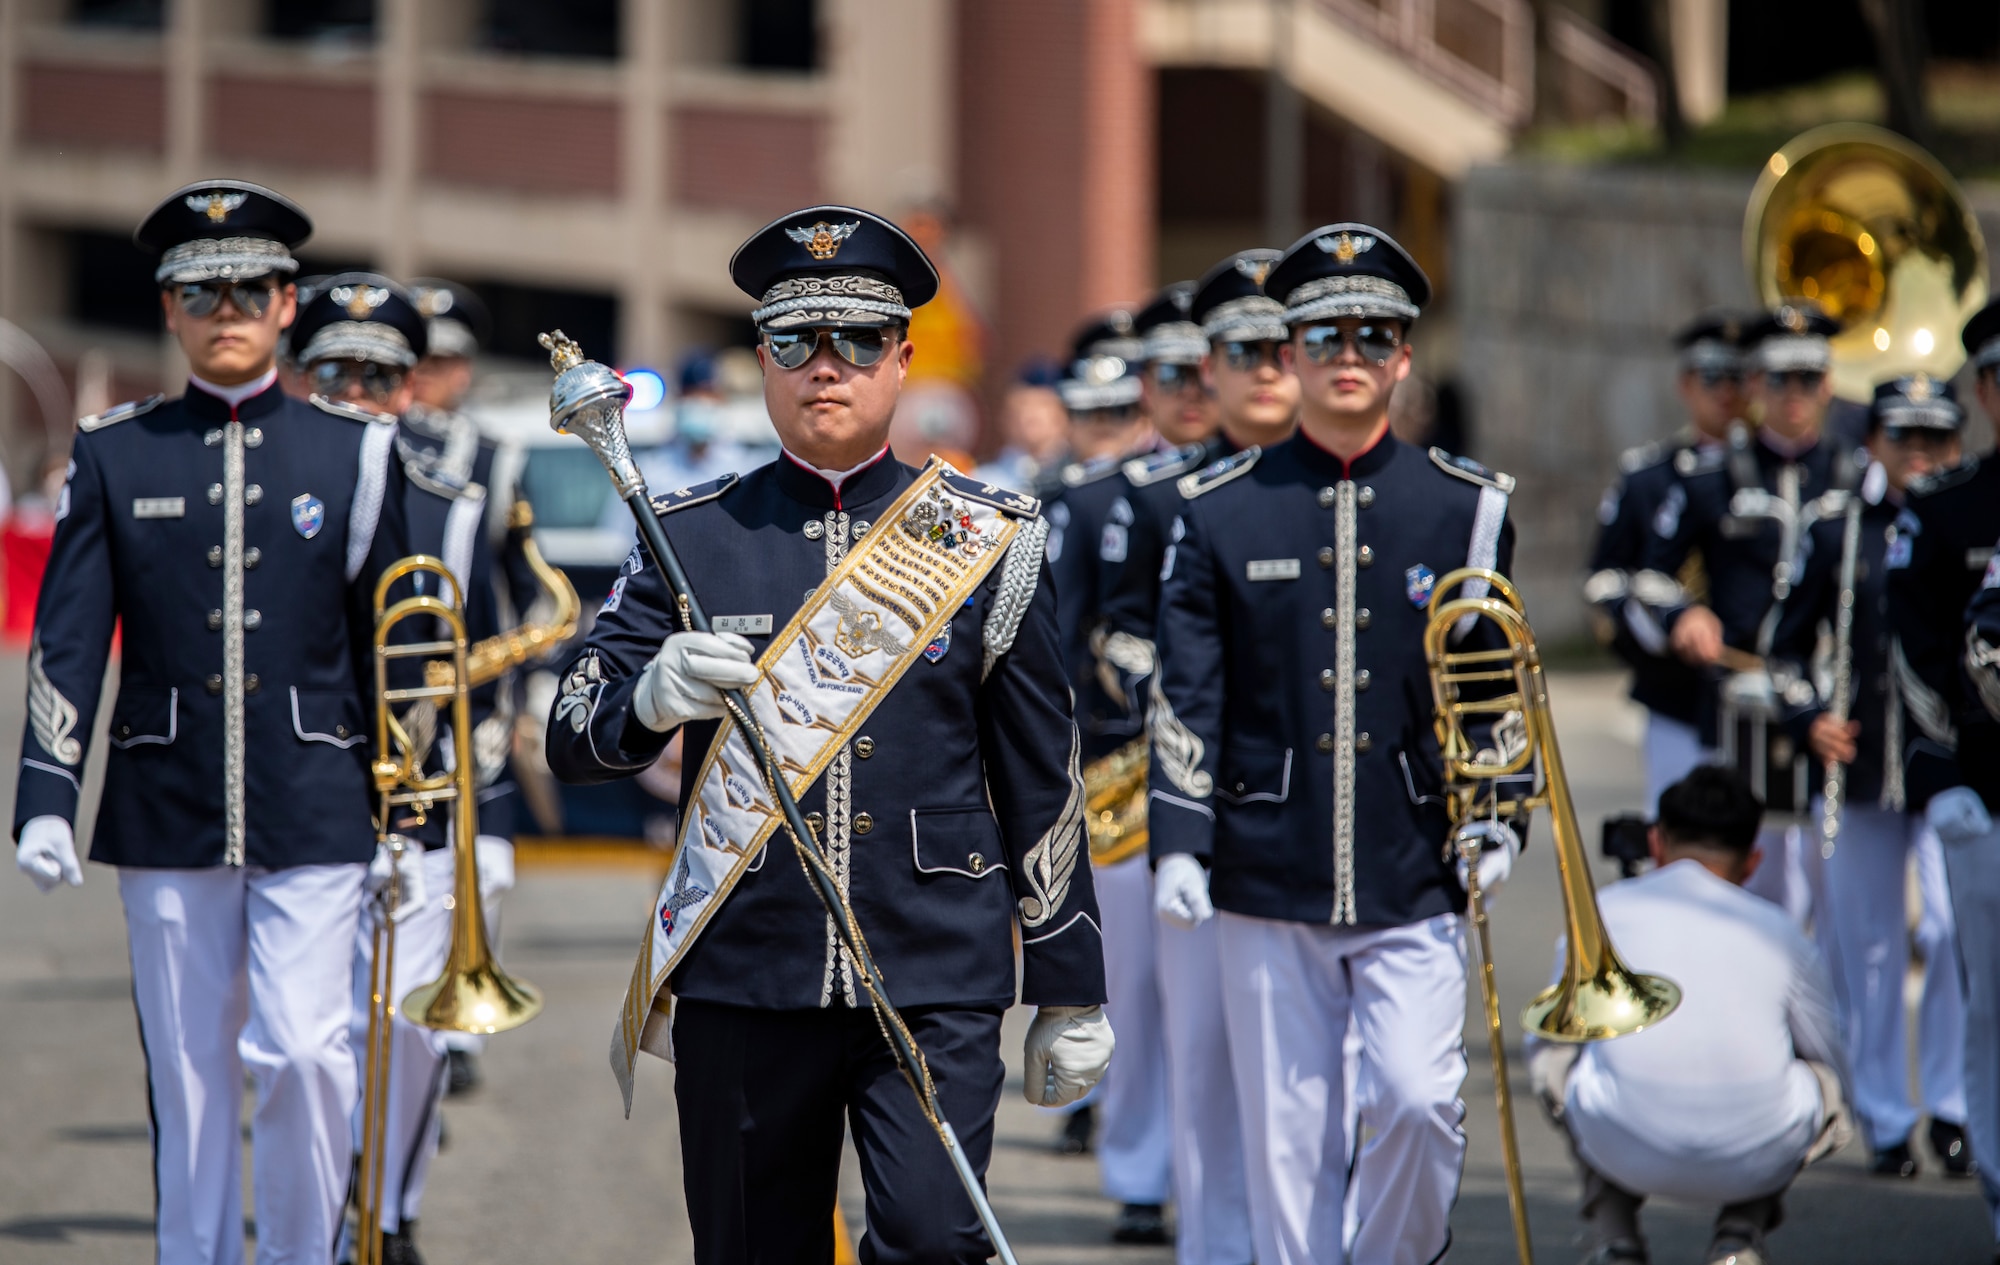 Republic of Korea Air Force band members perform while marching in the Armed Forces Day Parade.